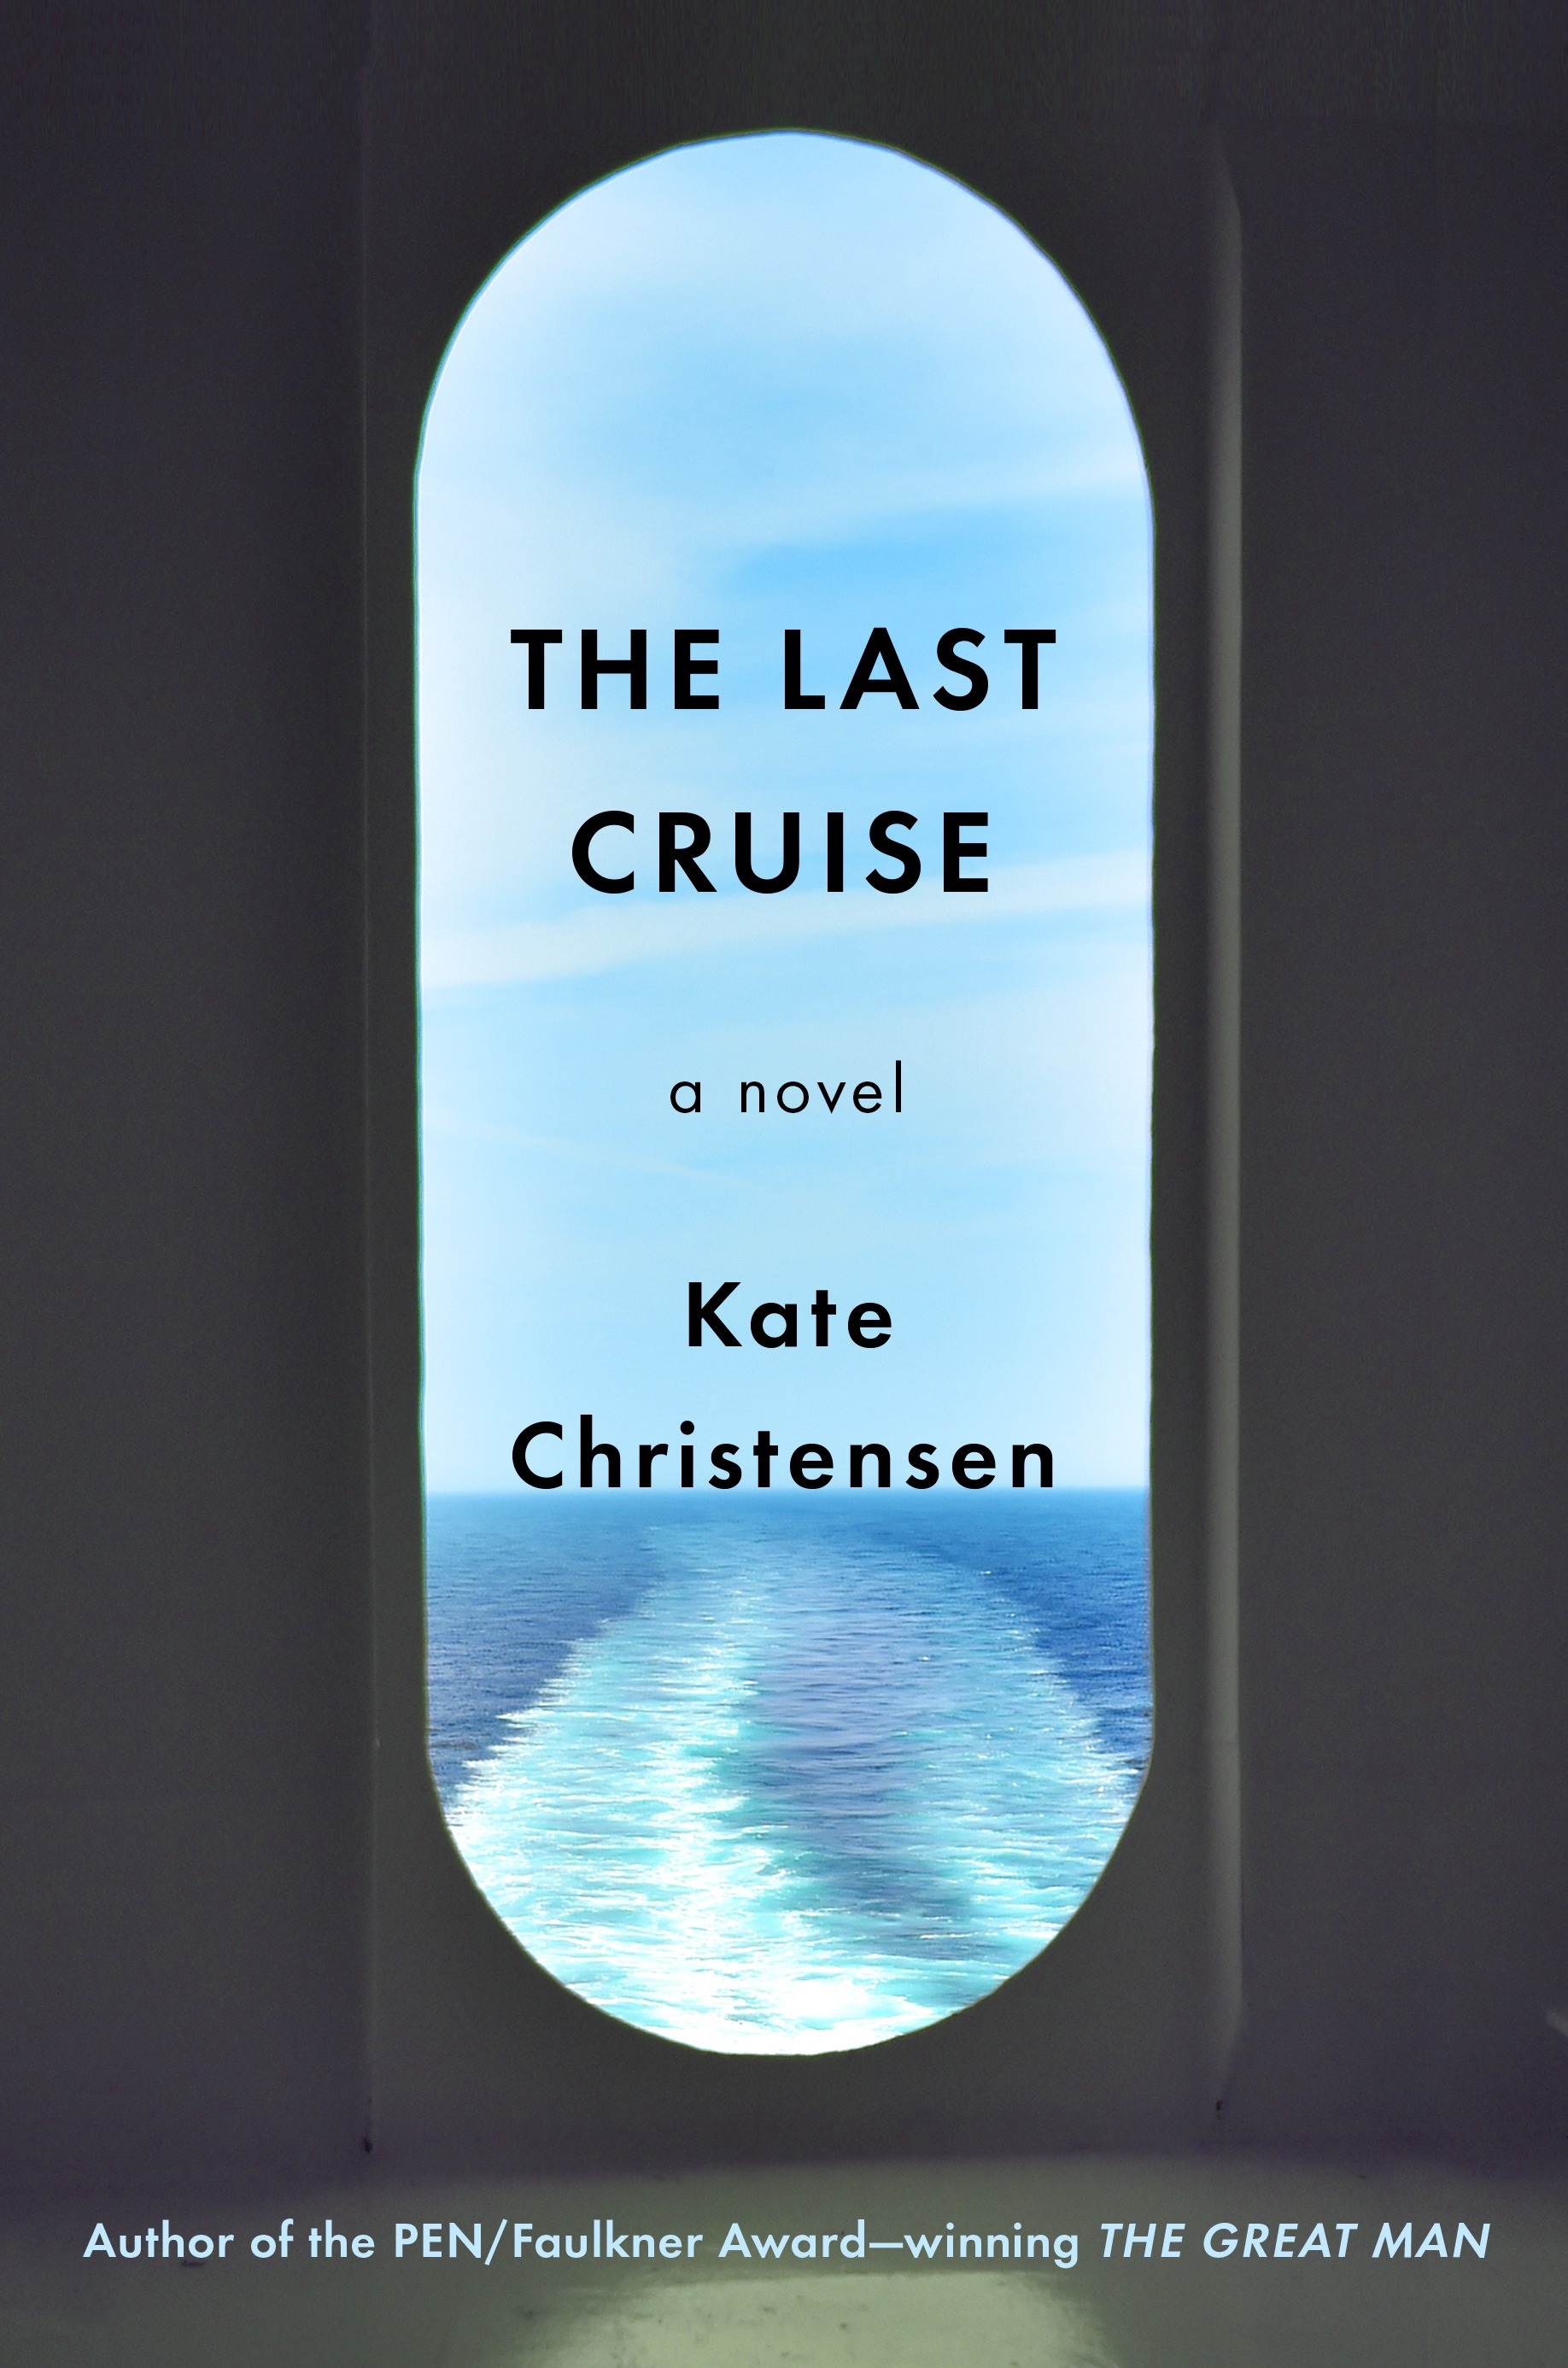 “The Last Cruise” book cover